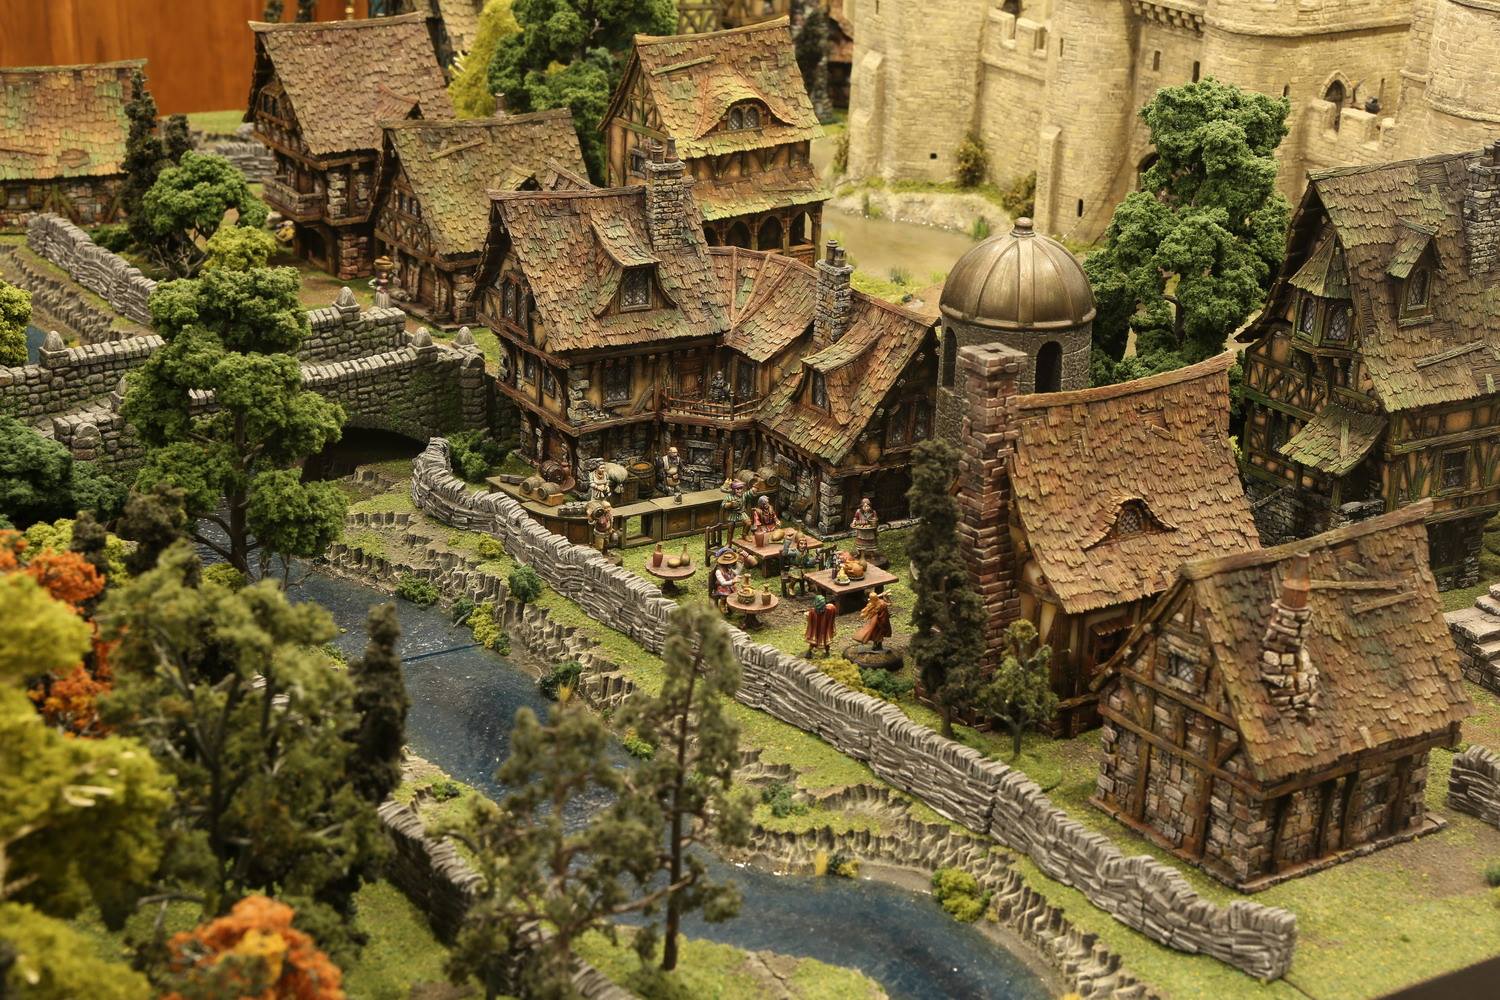 This Fantasy Diorama Is Absolutely Incredible